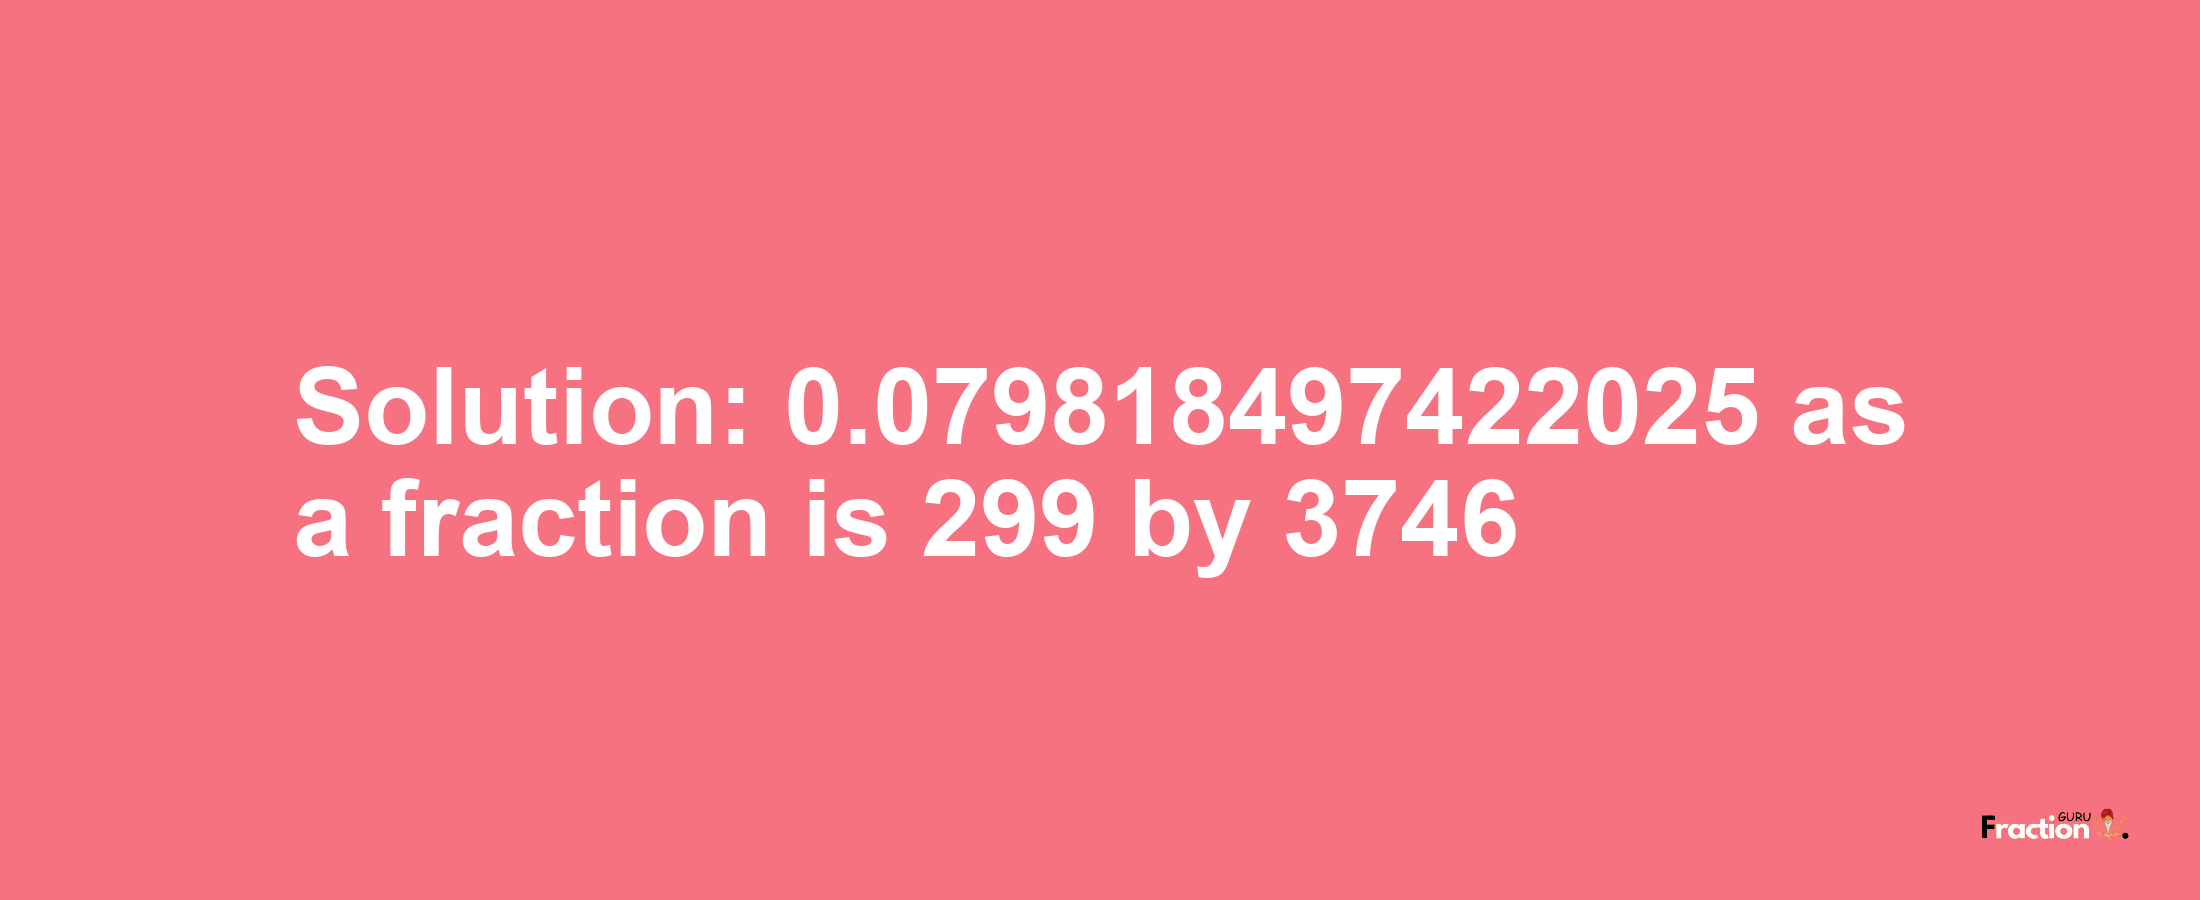 Solution:0.079818497422025 as a fraction is 299/3746